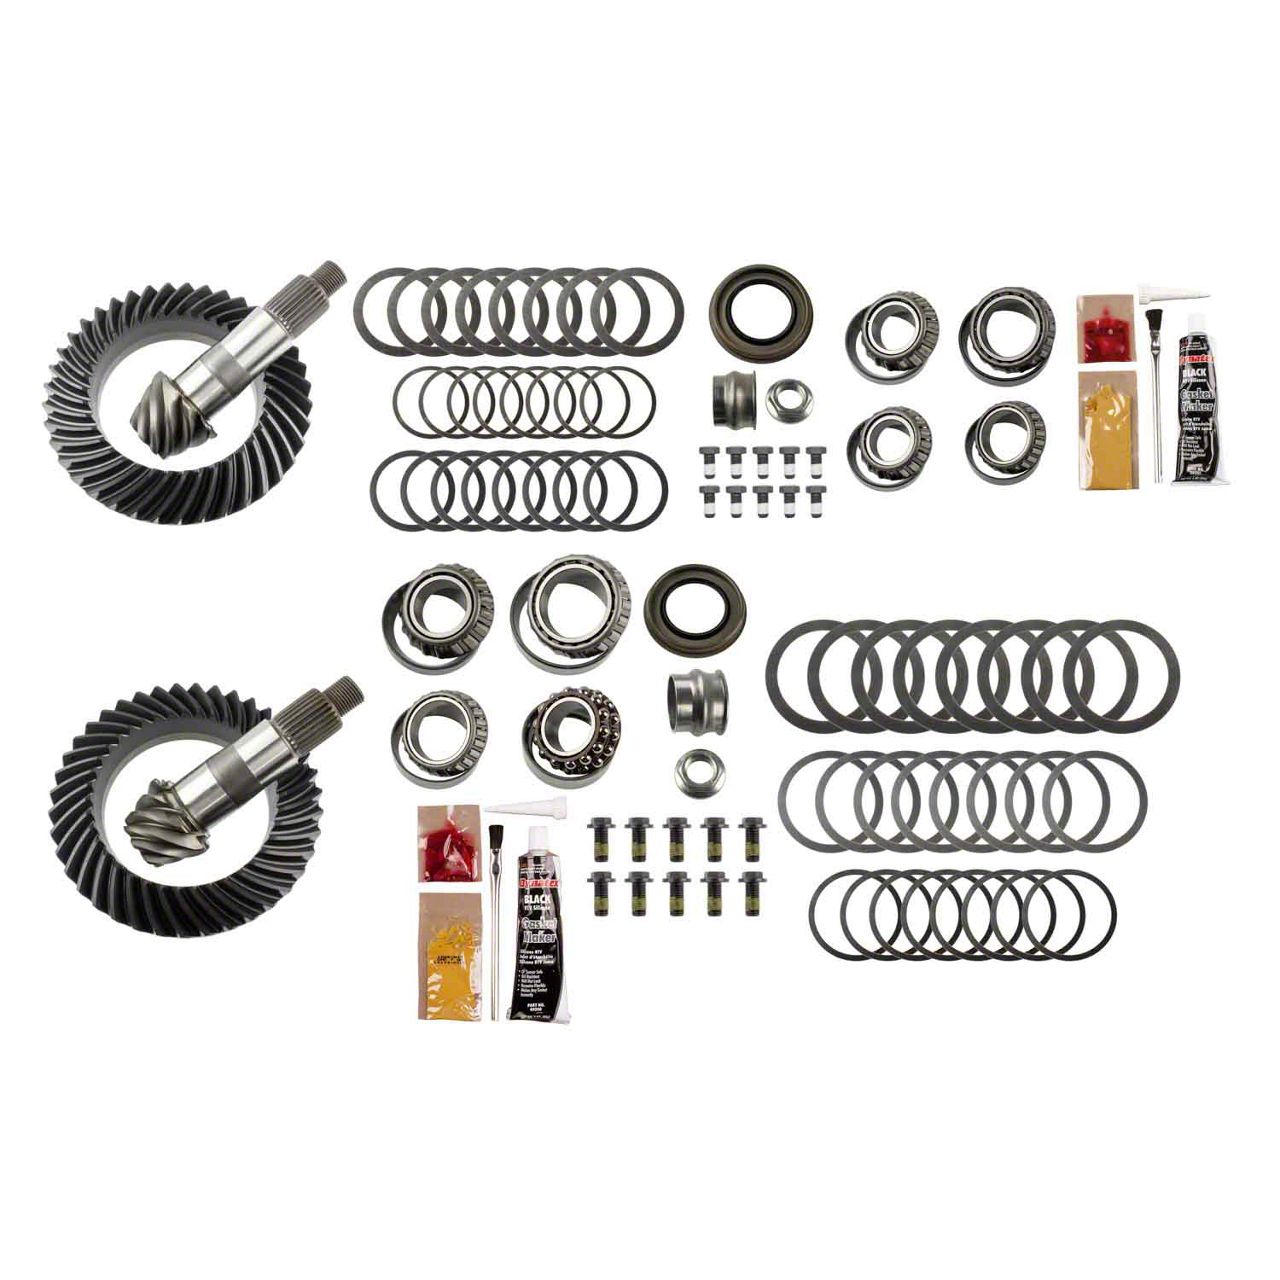 Motive Gear Jeep Gladiator Dana 44 Front and Dana 44 Rear Axle Complete  Ring and Pinion Gear Kit; 4.88 Gear Ratio MGK-133 (20-23 Jeep Gladiator JT  Launch Edition, Rubicon) Free Shipping